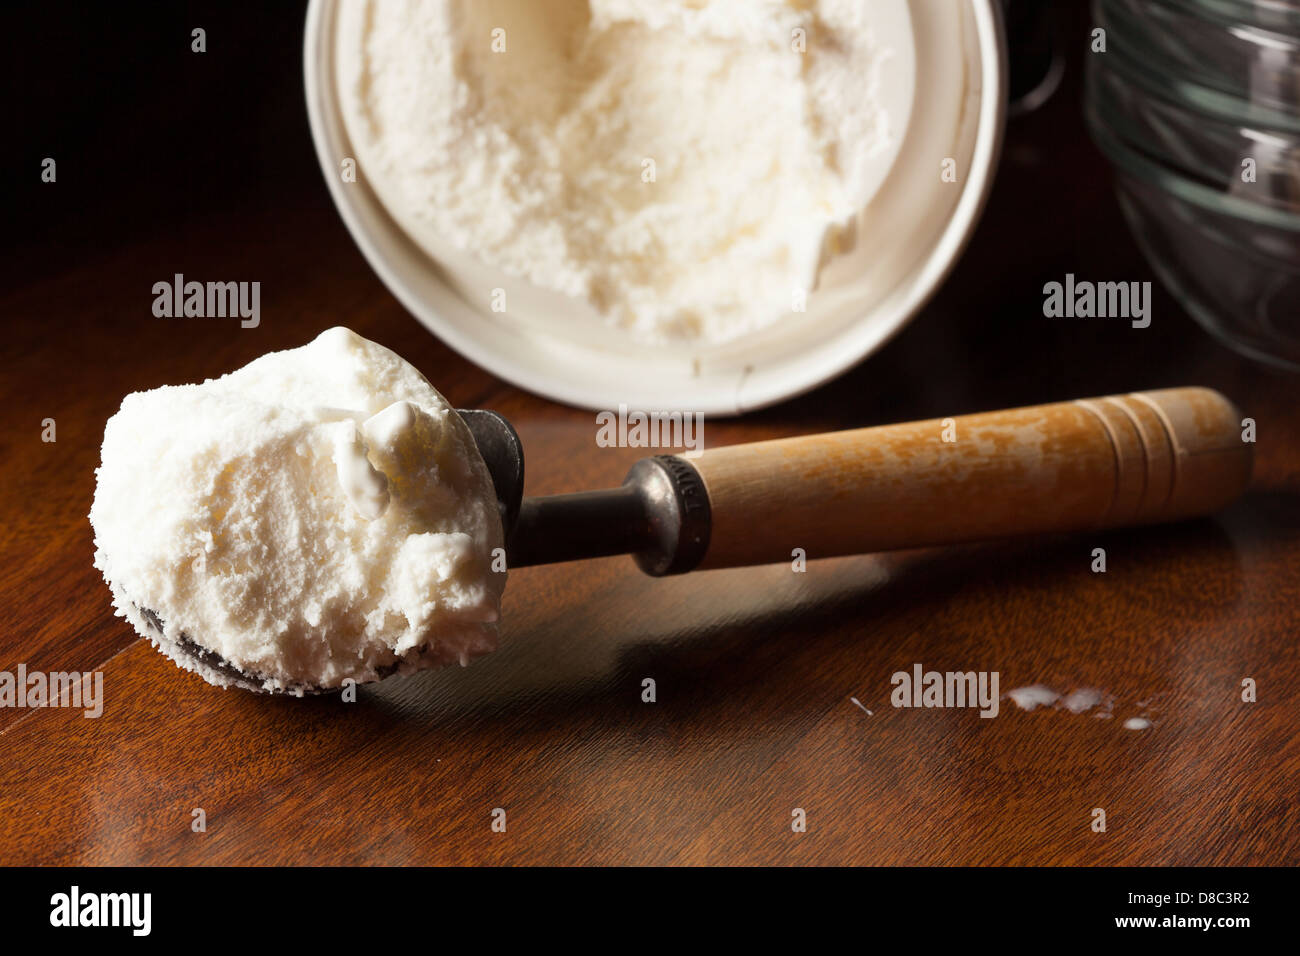 Cold Organic ice Cream against a background Stock Photo